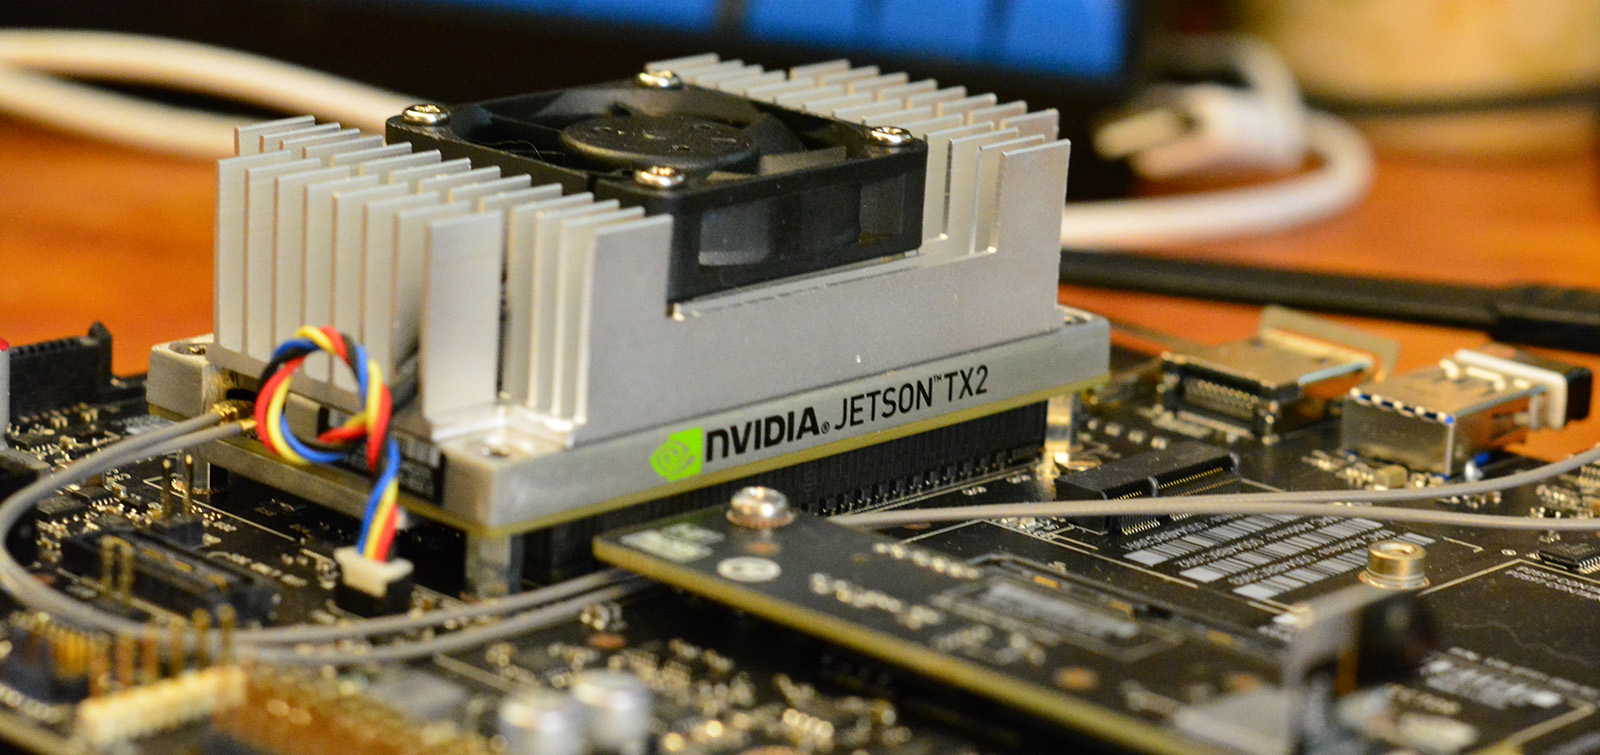 Hands-On Nvidia Jetson TX2: Fast Processing For Embedded Devices